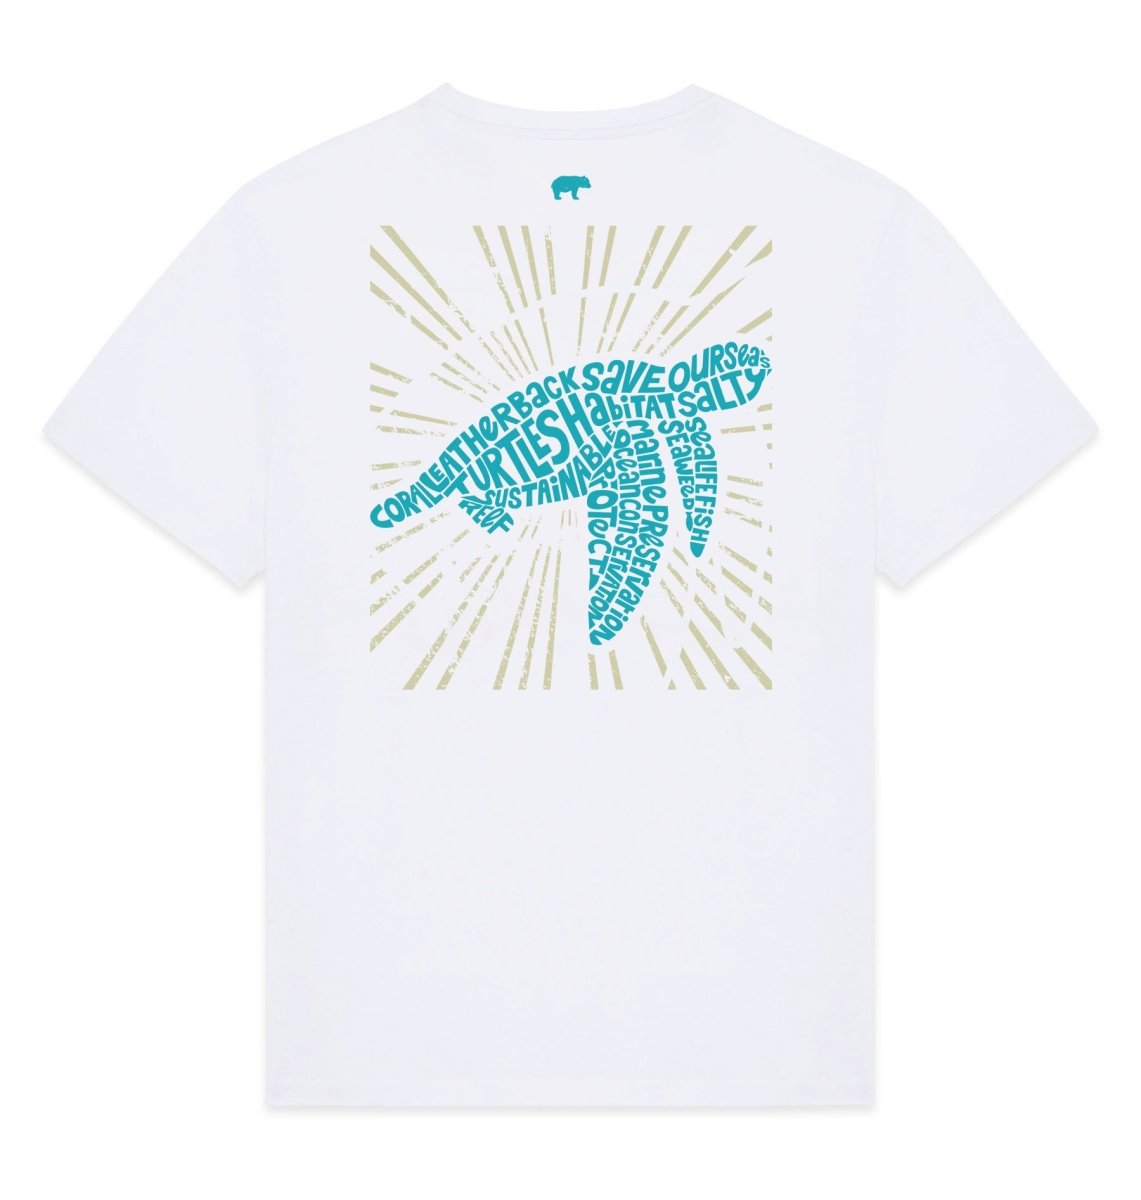 Turtle T-Shirt - Mens Save The Turtles Tee - Wildlife Clothing That Supports Marine Conservation, 3XL / White